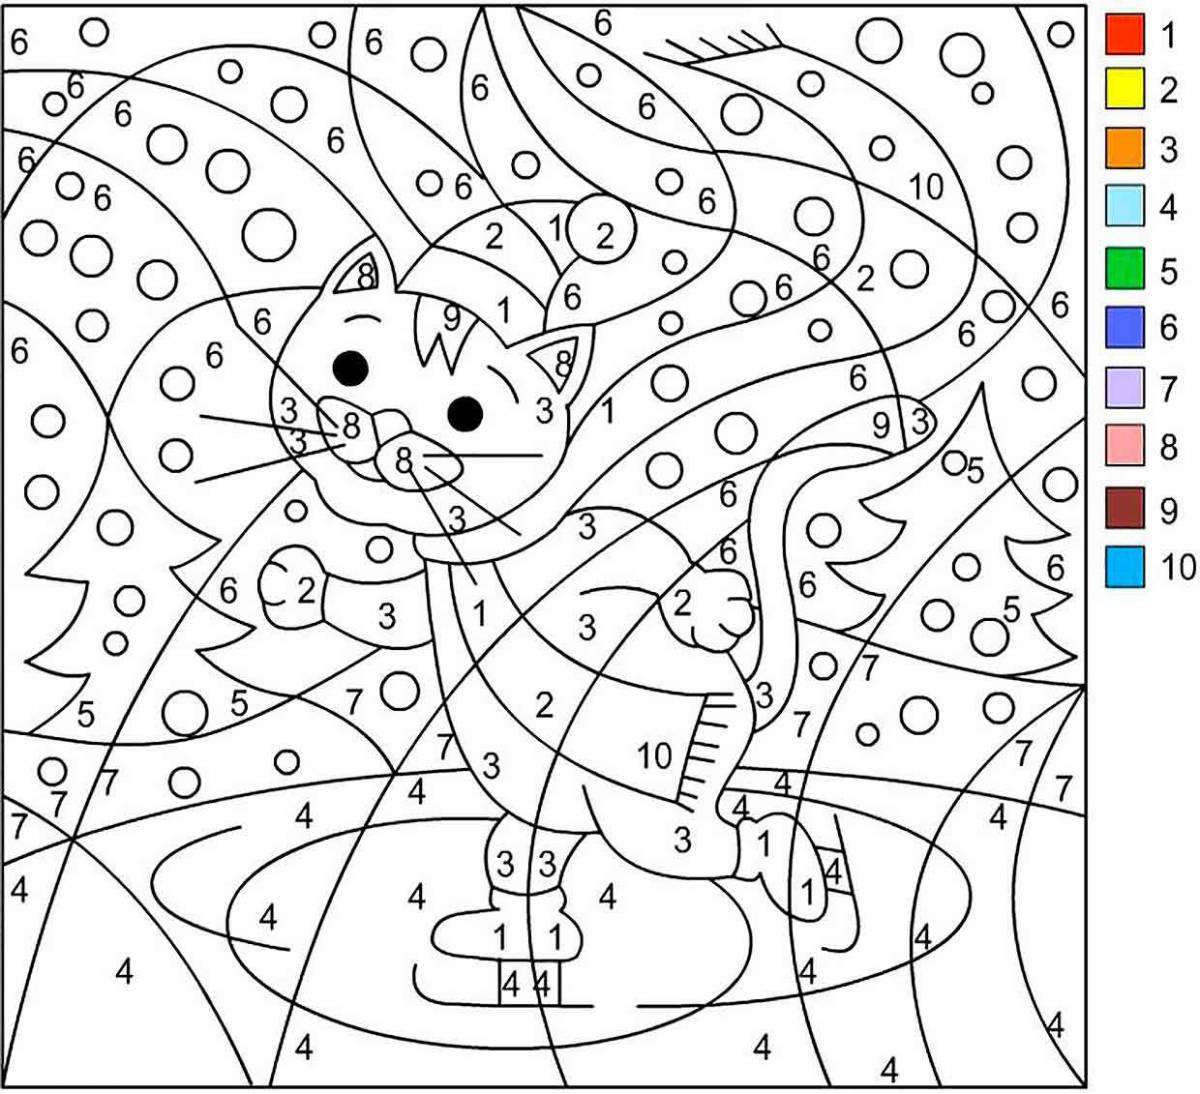 Stimulating coloring by numbers for 7-8 year olds